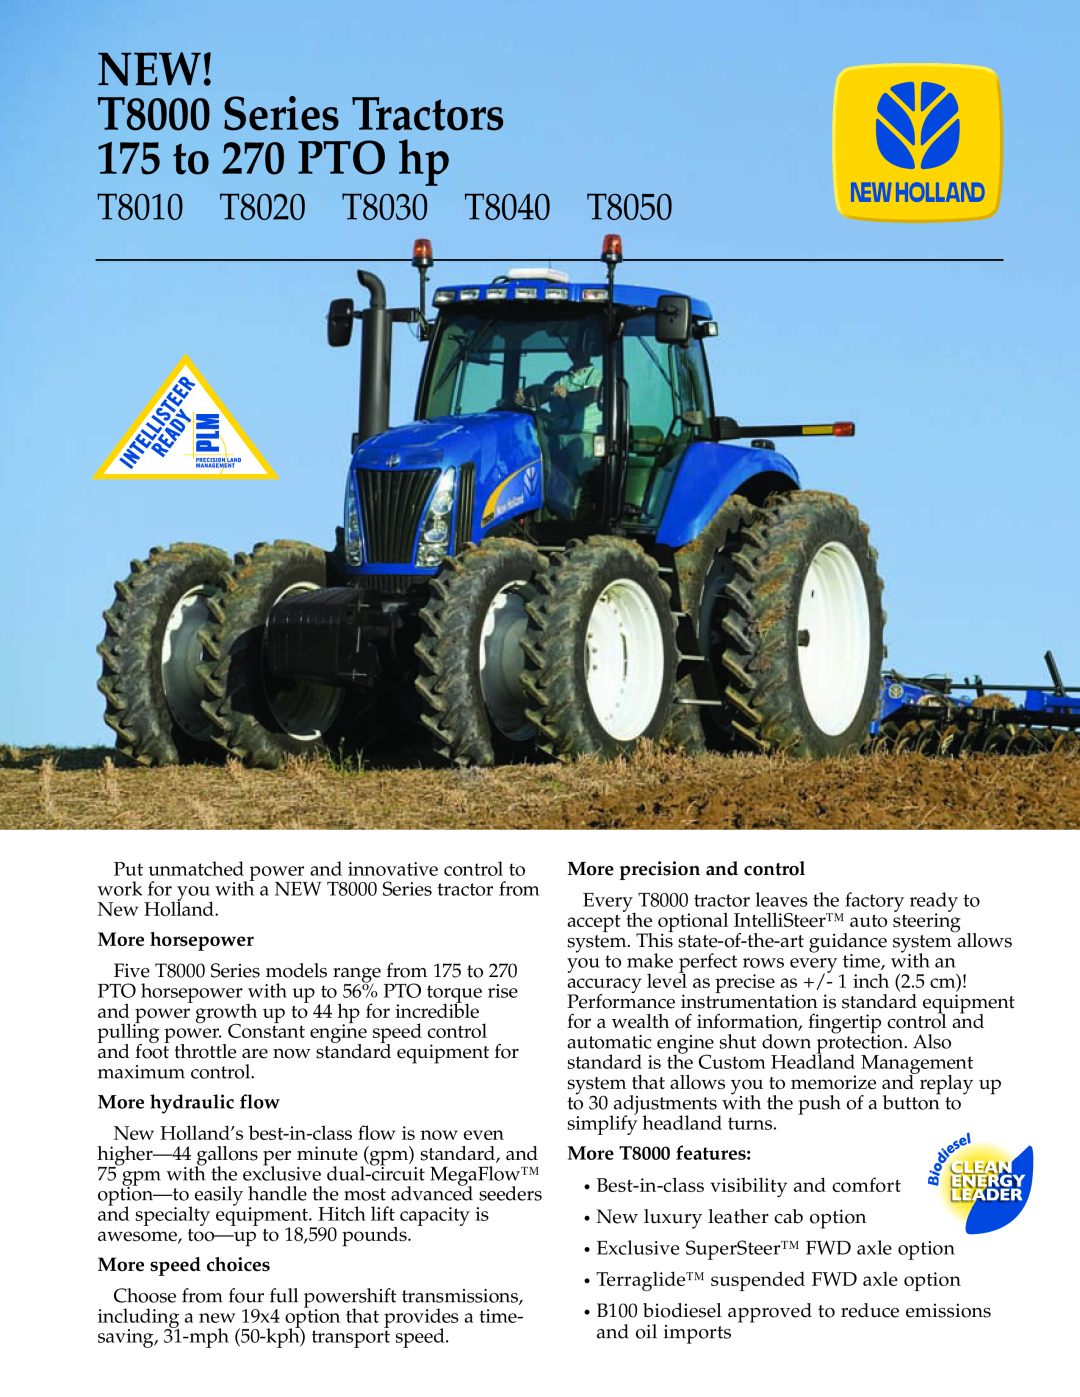 New Holland T8040 manual NEW T8000 Series Tractors 175 to 270 PTO hp, T8010, T8020, T8050, T8030, More horsepower 